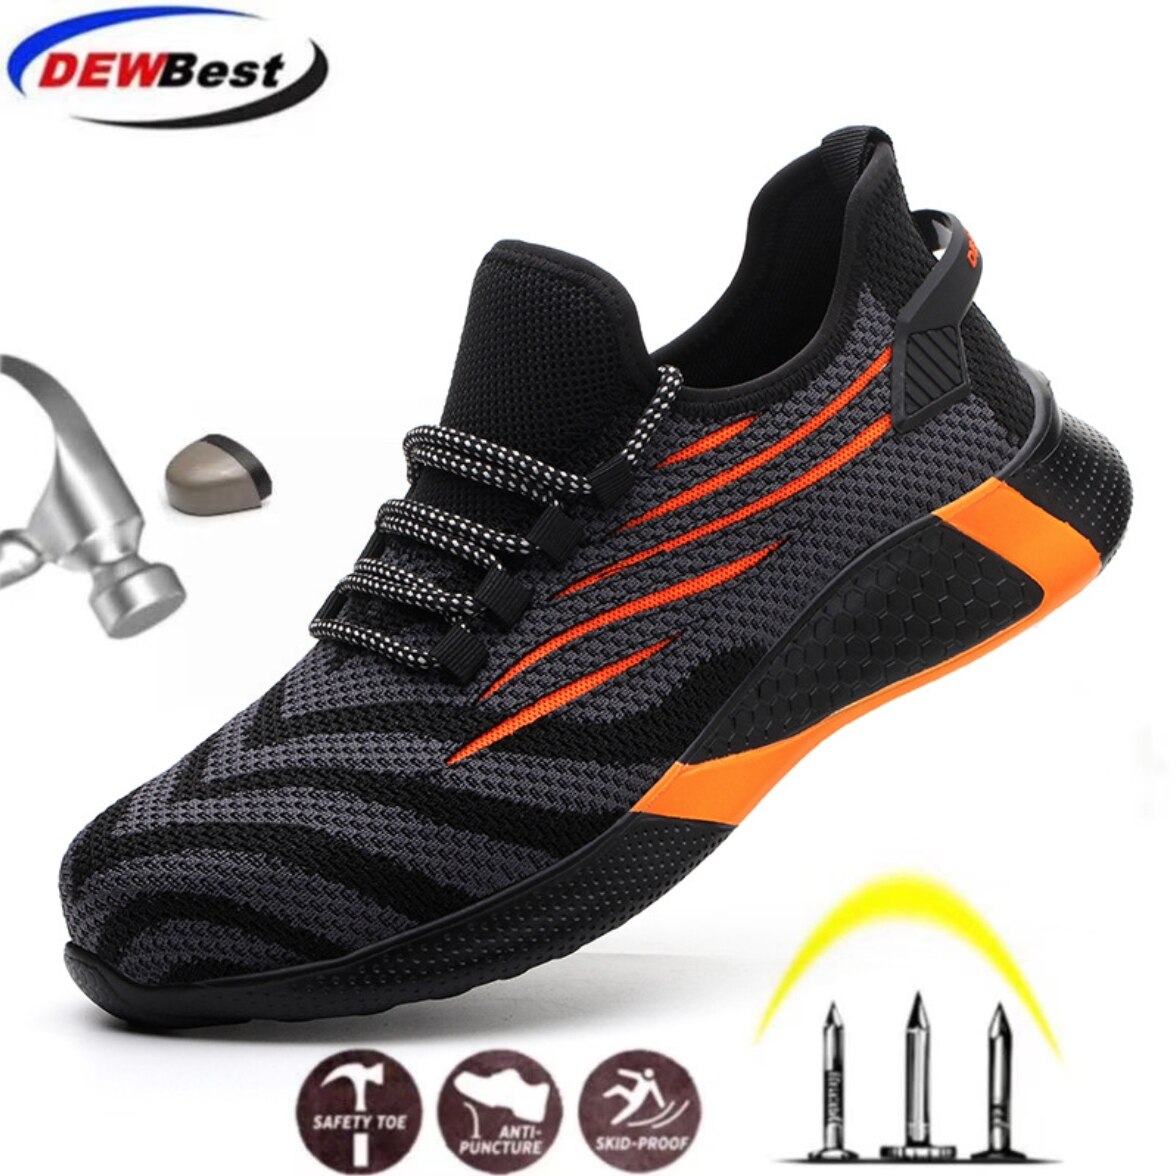 Men And Women Safety Work Shoes with Steel Toe Cap Puncture-Proof Boots Lightweight Breathable Sneakers Dropshipping